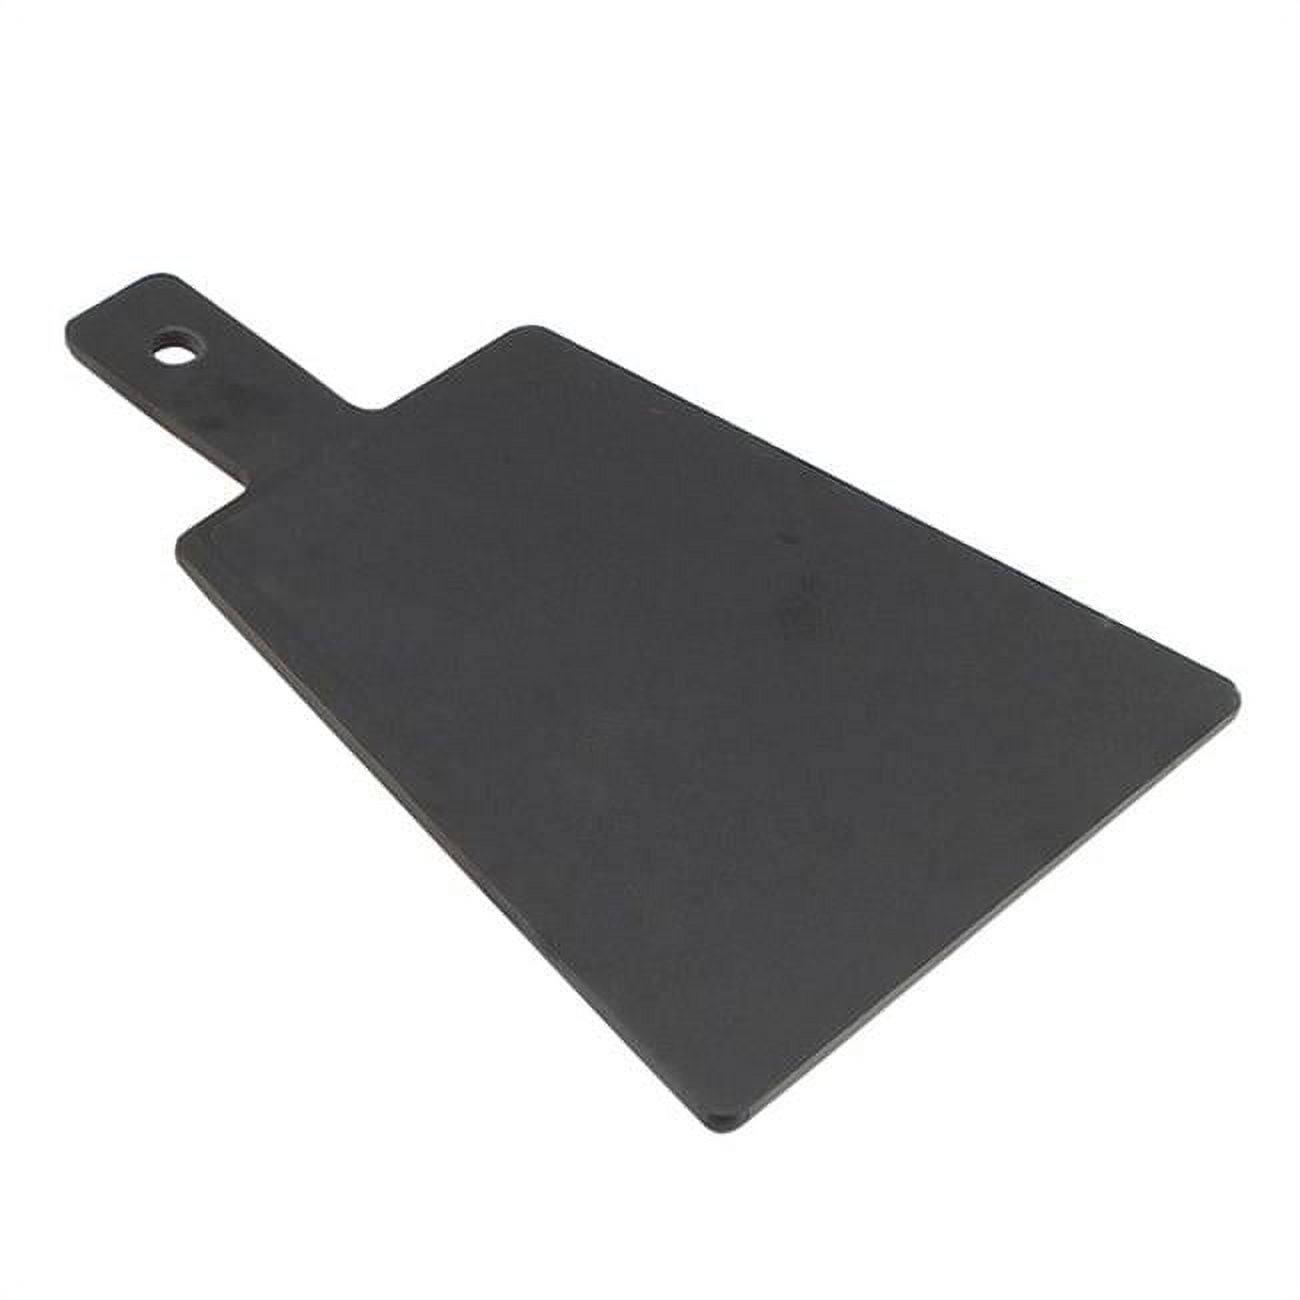 1535-12-13 Black Trapezoid Flat Bread Serving & Display Board With Handle - 11.625 X 7.875 X .25 In.